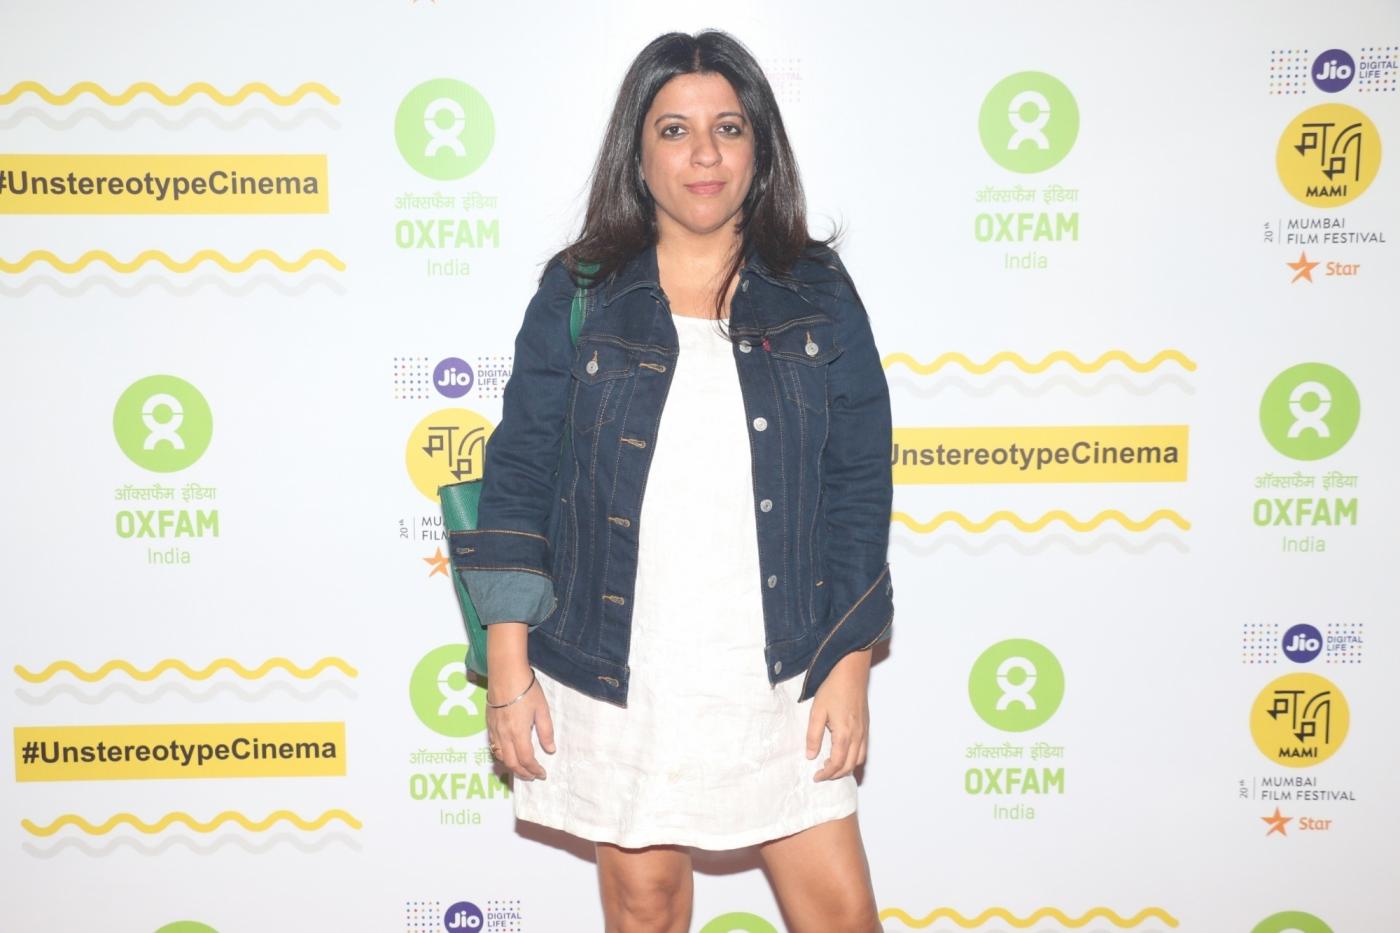 Mumbai: Film director Zoya Akhtar at the red carpet of Oxfam Mami ' Women In Film ' Brunch in Mumbai on Oct 28, 2018. (Photo: IANS) by .